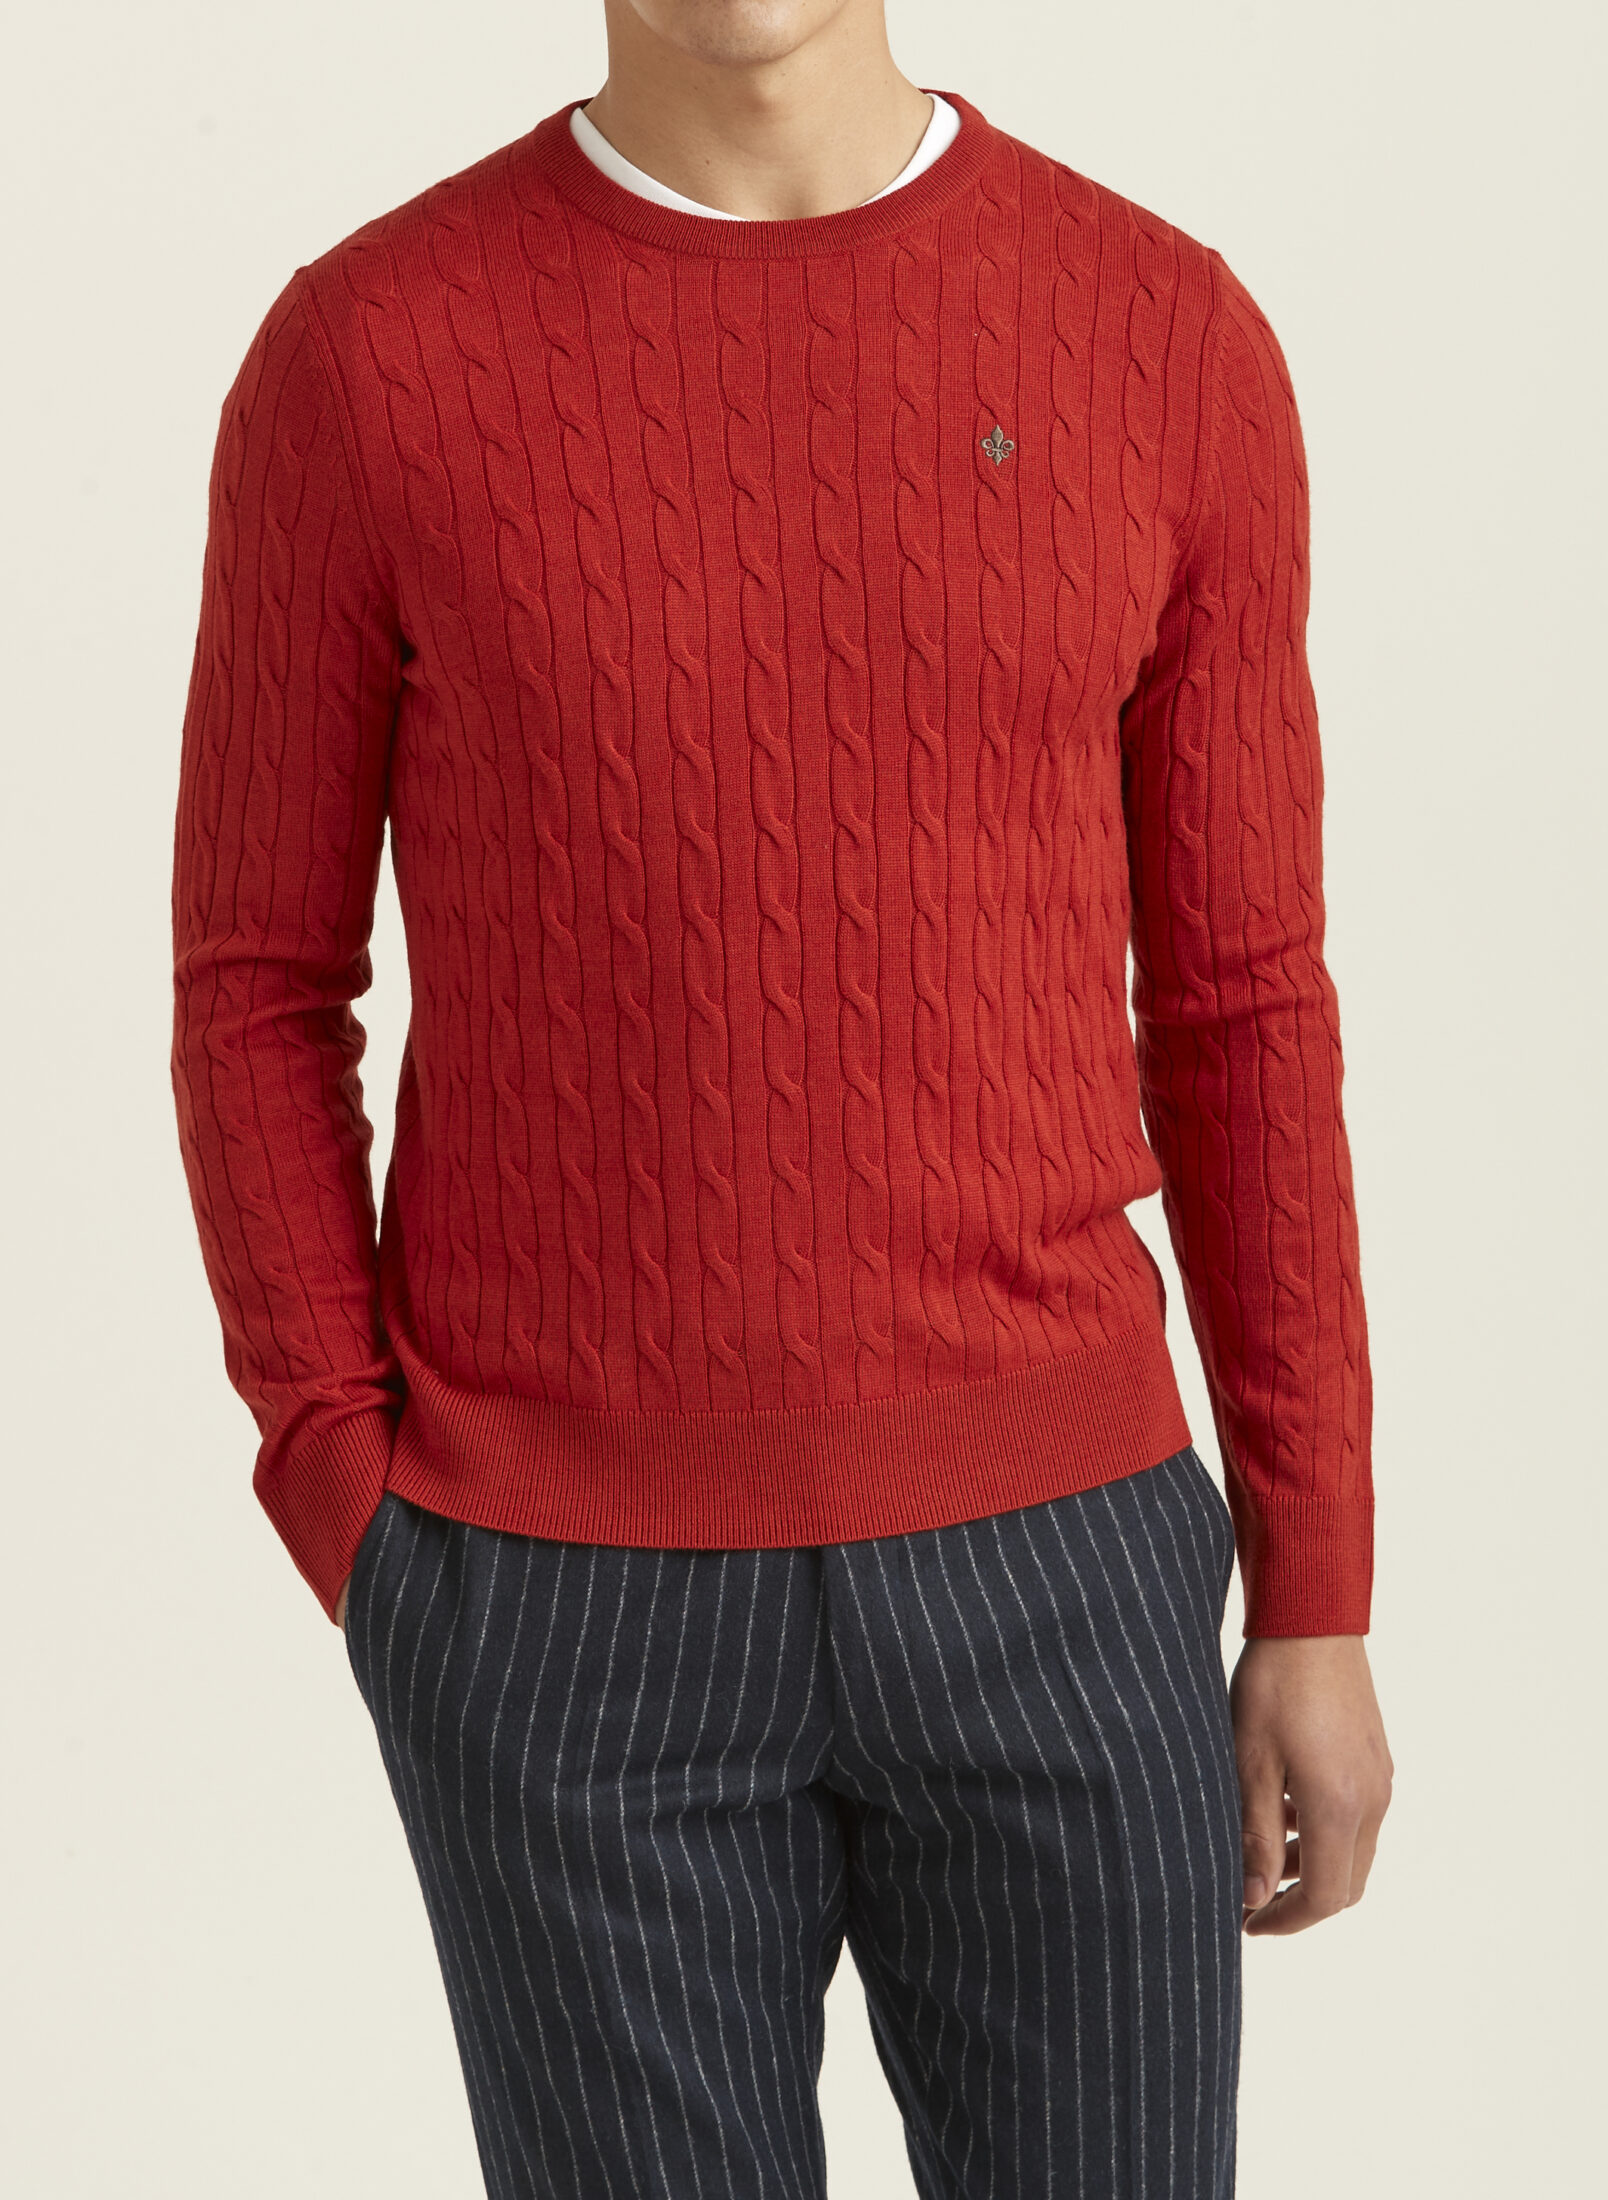 901153-merino-cable-oneck-43-red-1-crop